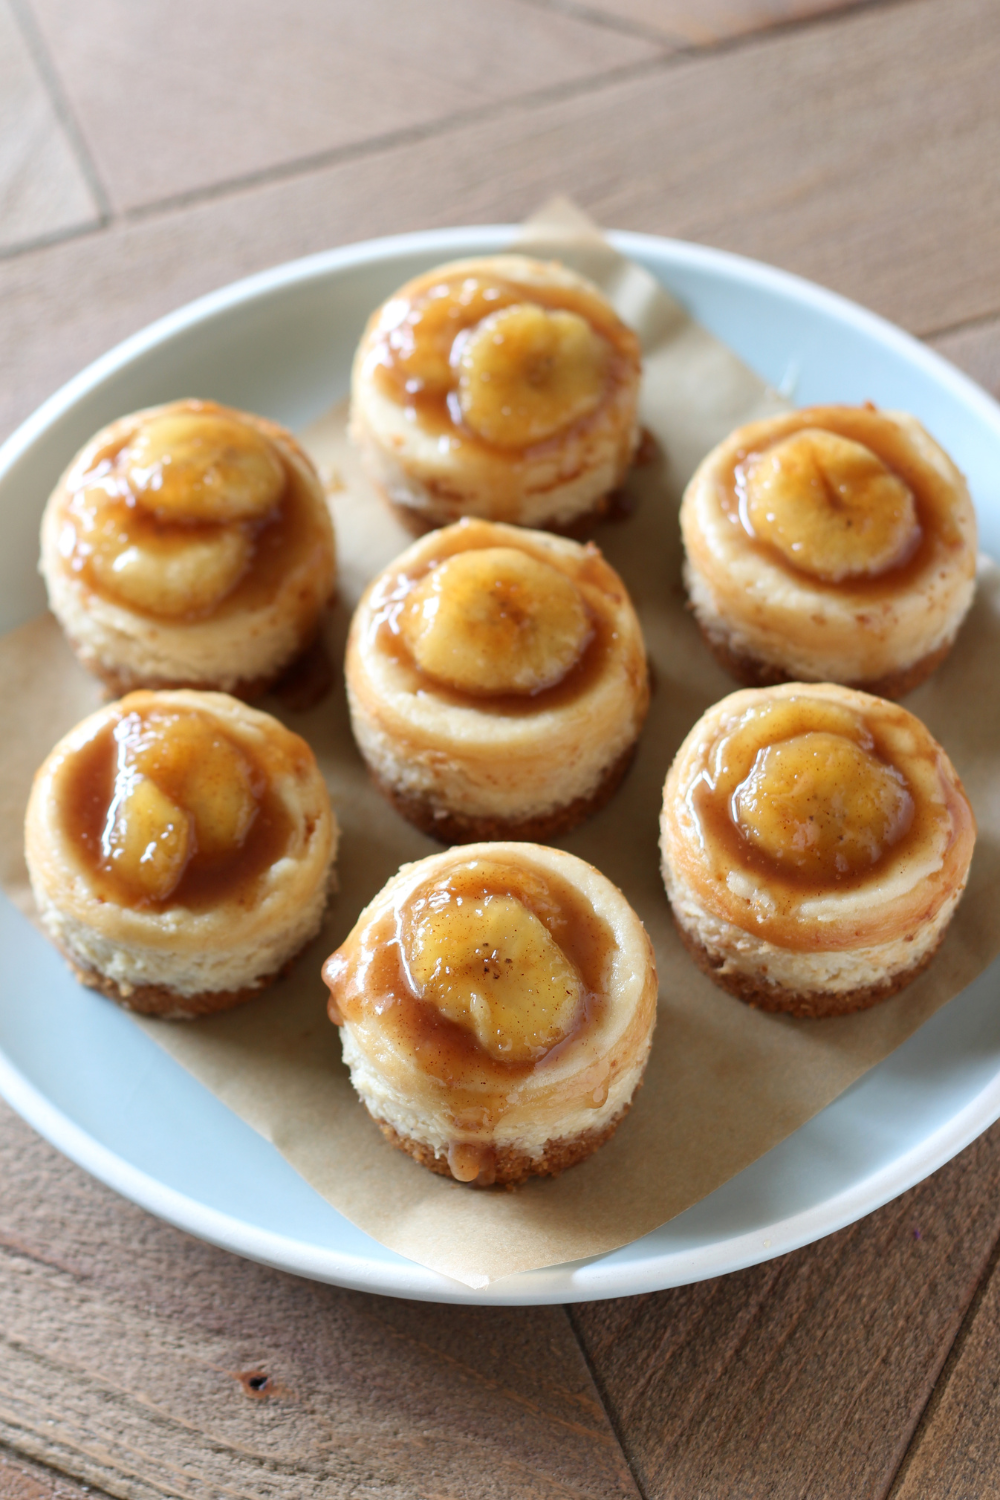 several mini bananas foster cheesecakes, topped with bourbon caramel and banana slices, on a platter, ready to serve